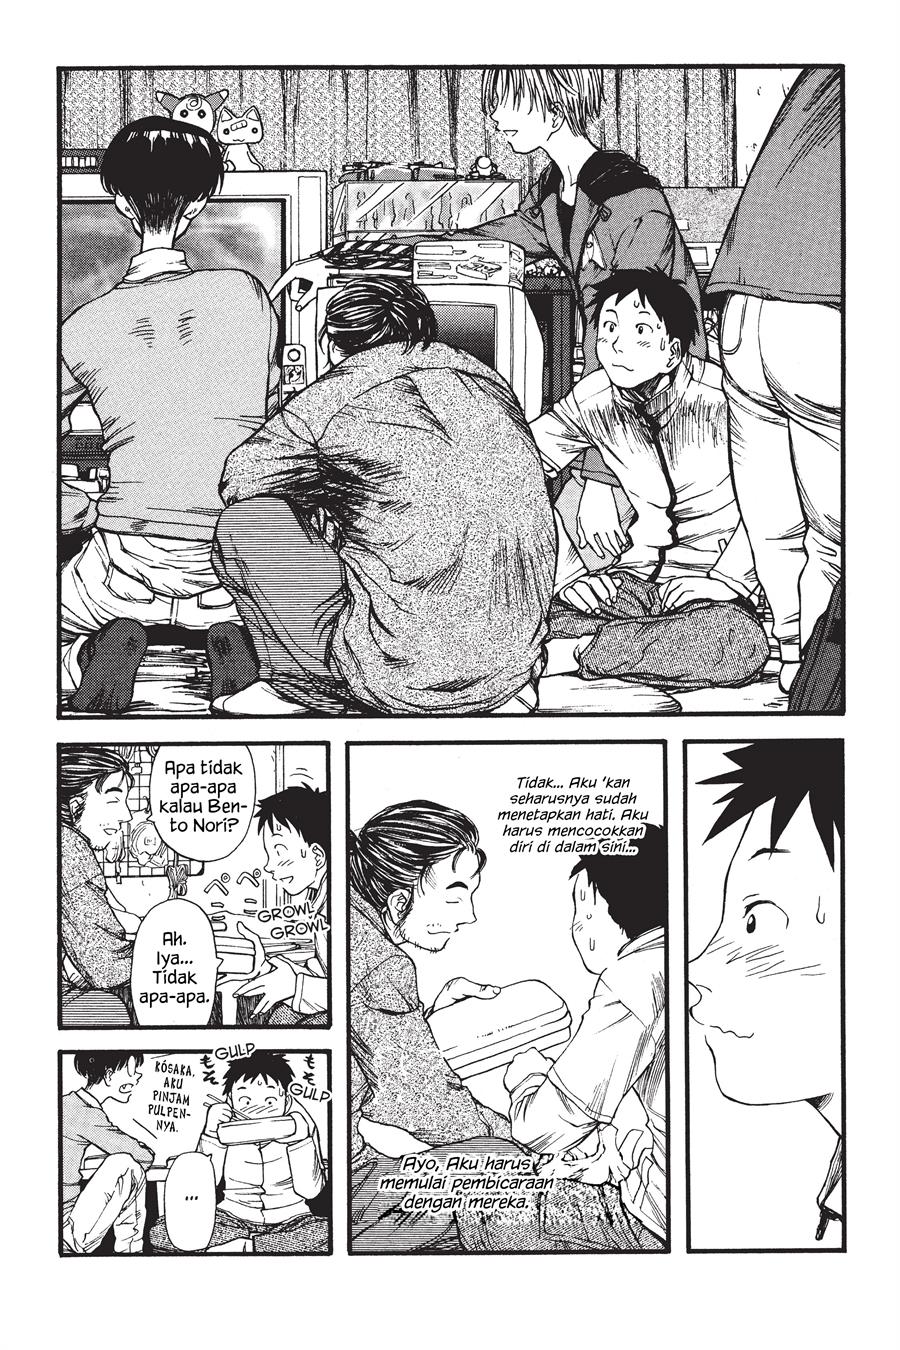 Genshiken – The Society for the Study of Modern Visual Culture Chapter 2